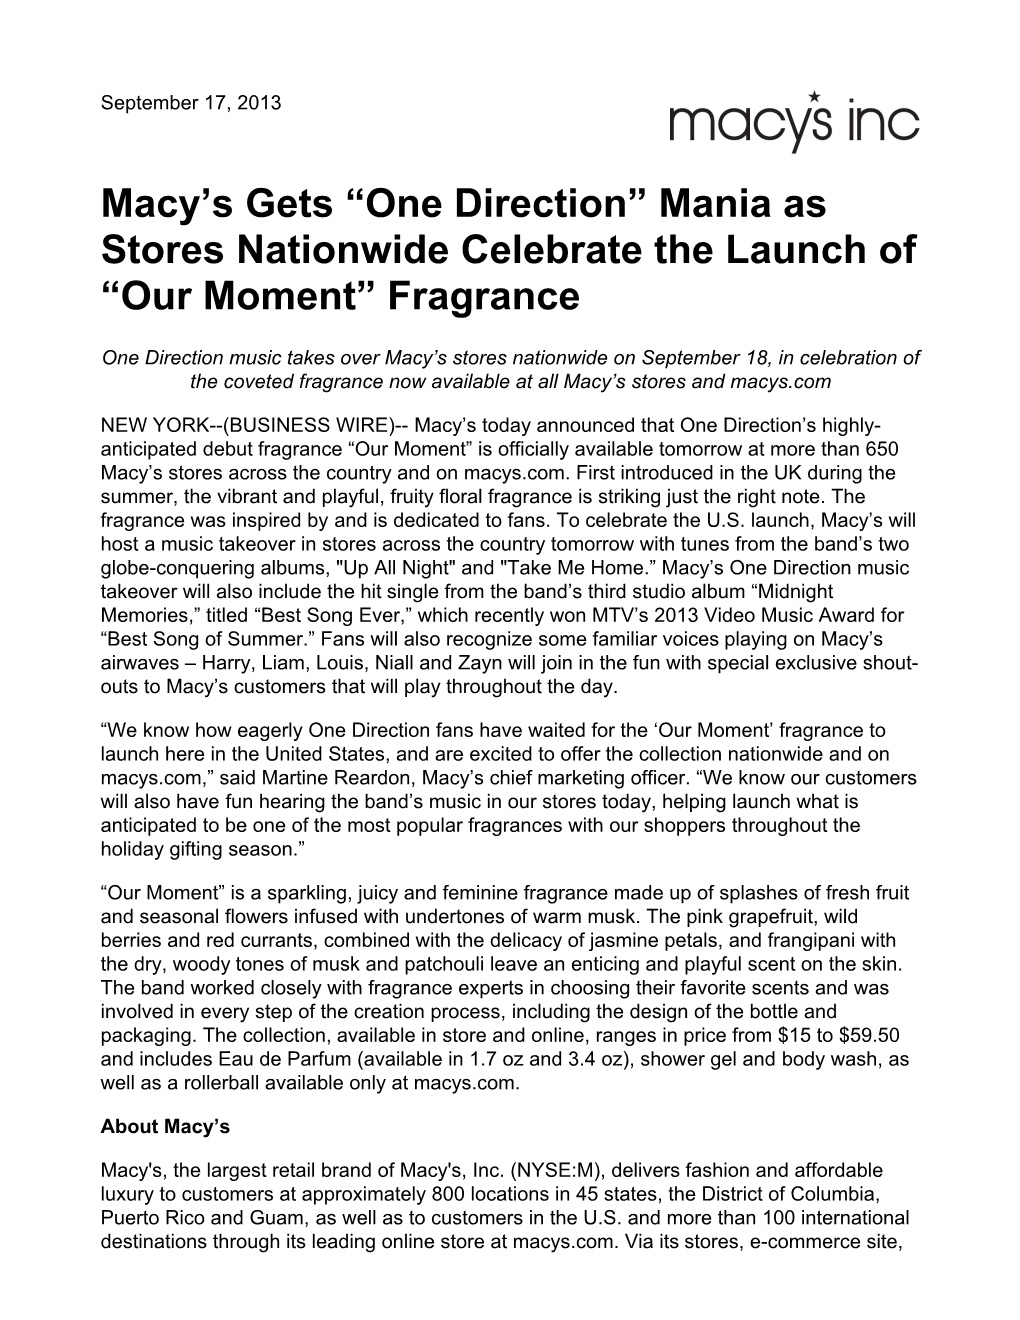 Macy's Gets “One Direction” Mania As Stores